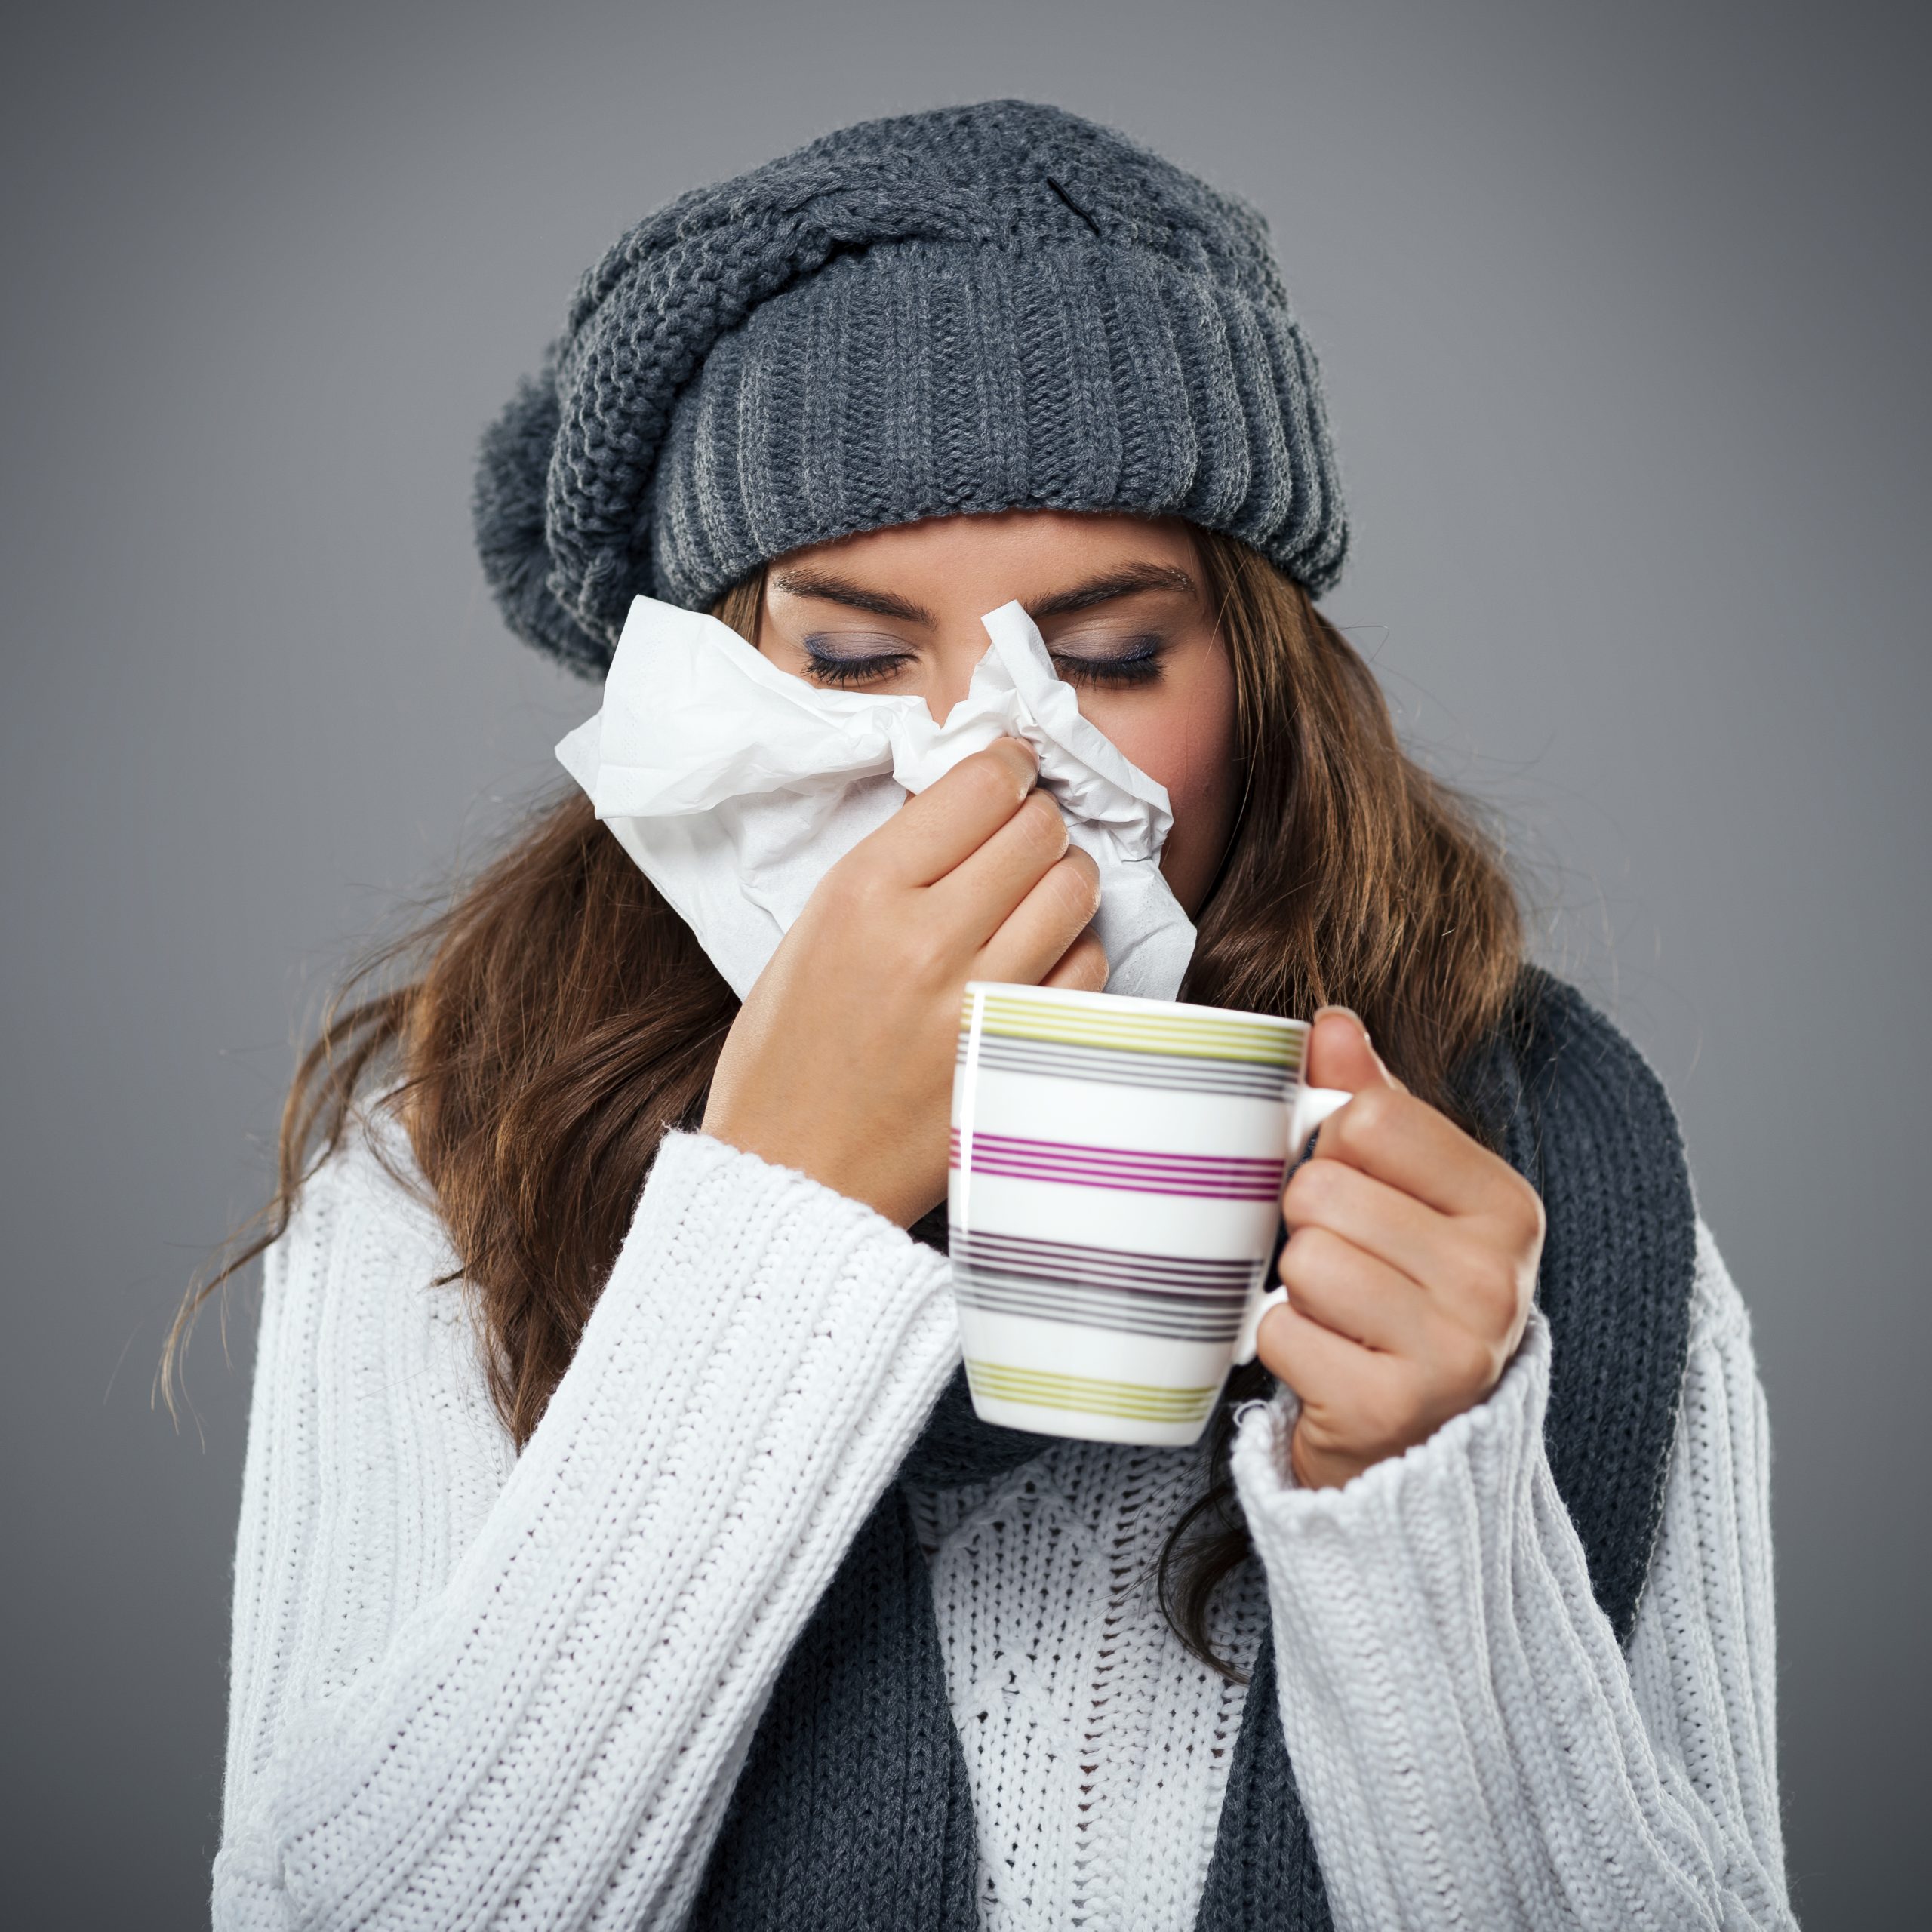 Young woman having flu and blowing her nose at handkerchief